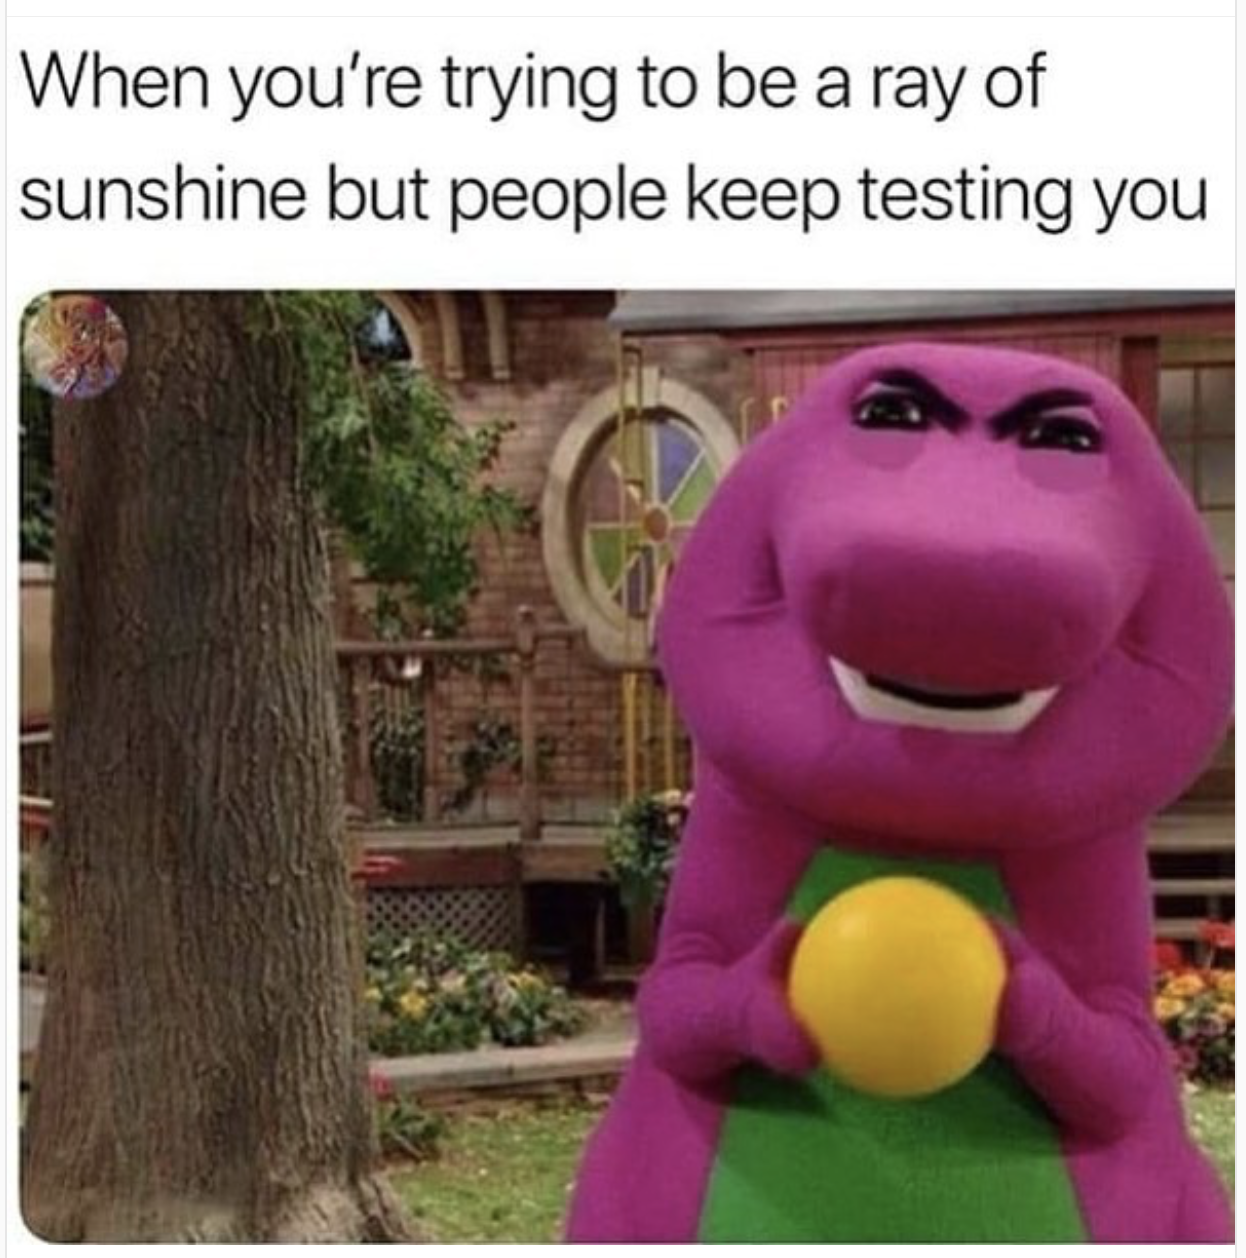 memes - you re trying to be a ray - When you're trying to be a ray of sunshine but people keep testing you